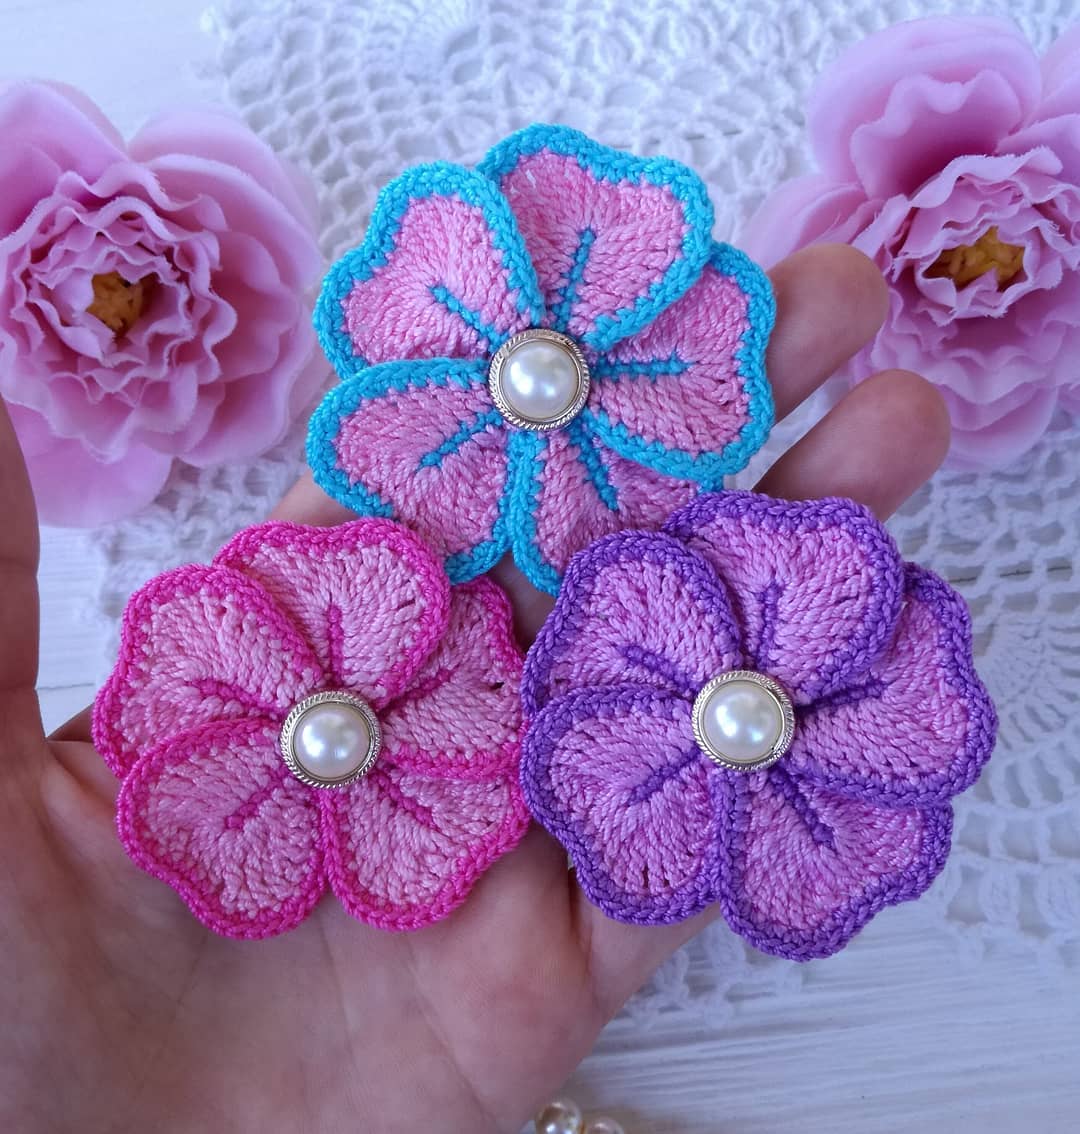 easy-and-cute-free-crochet-flowers-pattern-image-ideas-for-new-season